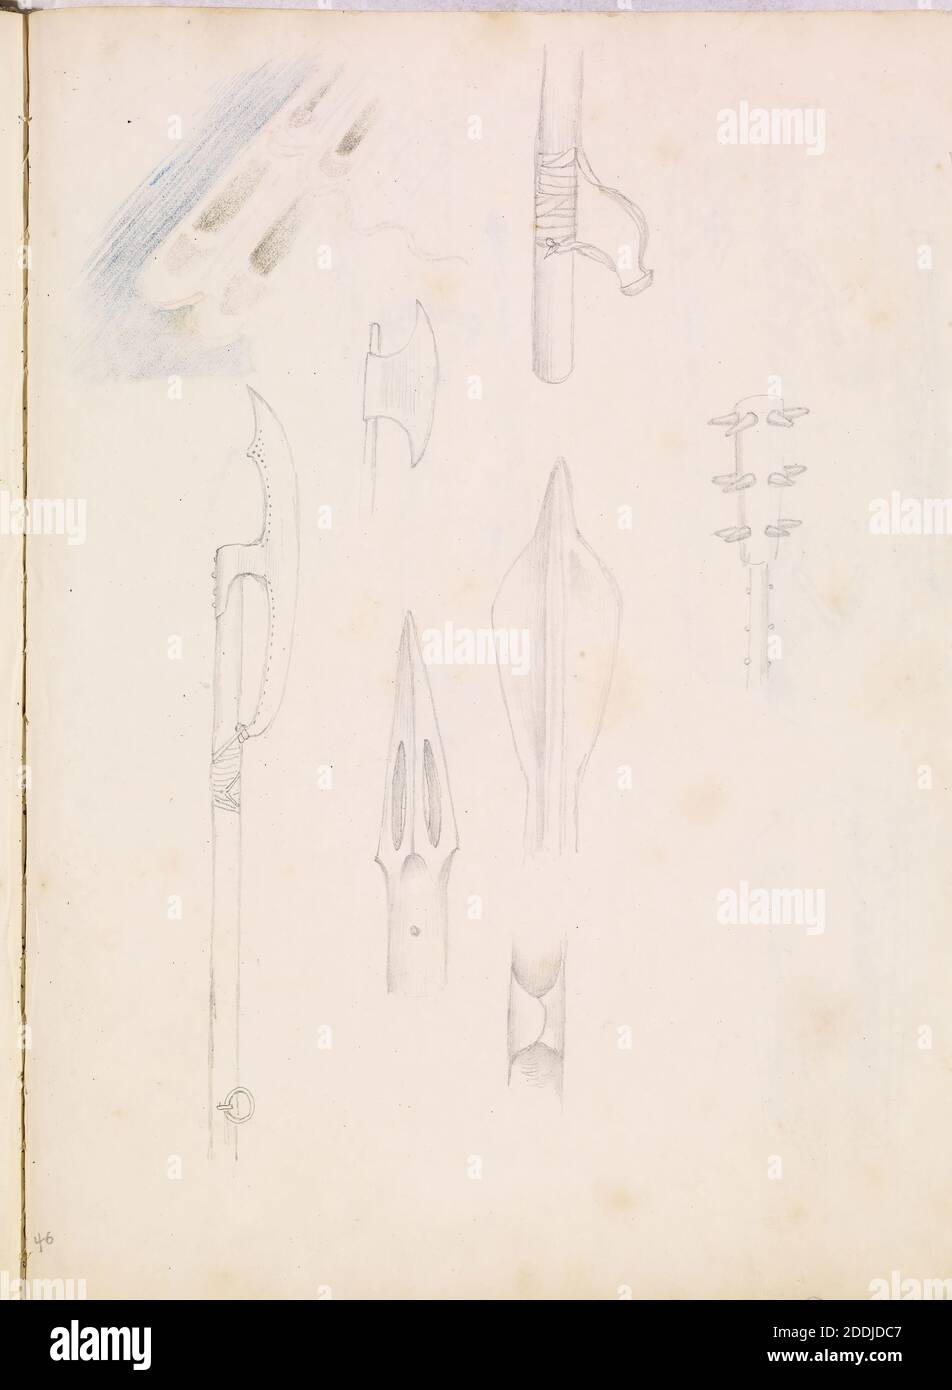 Sketchbook of Byzantine and Romanesque Decoration, 1887-1894 Studies of weaponry Sir Edward Burne-Jones, 110 sketches of Mediaeval and Byzantine decoration made in connection with studies for the 'Holy Grail' tapestries for Morris & Co., Art Movement, Pre-Raphaelite, Pencil, Sketch Stock Photo